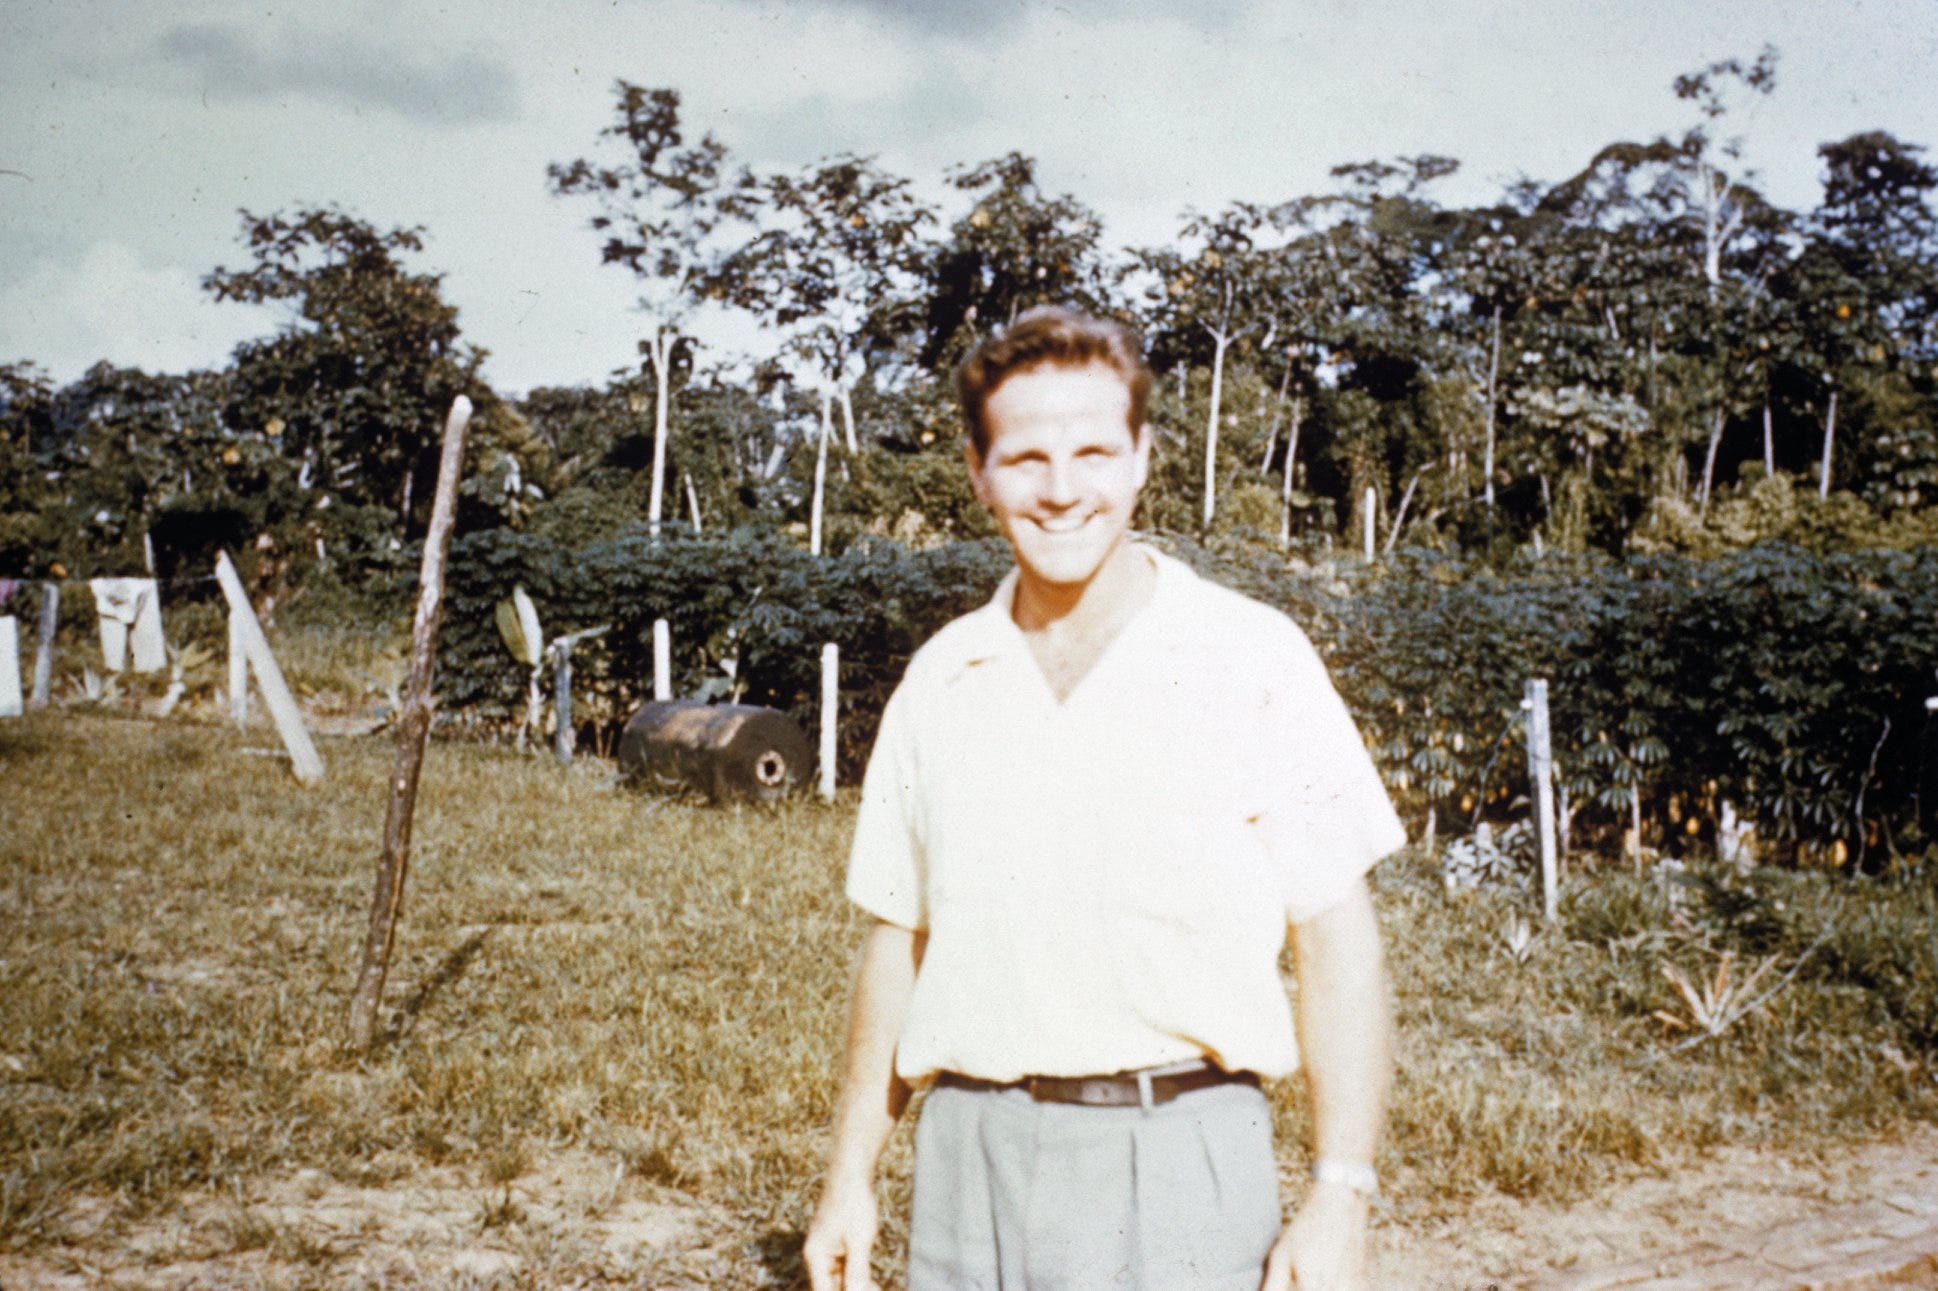 Discovering The Heart Of A Missionary: The Life Of Jim Elliot